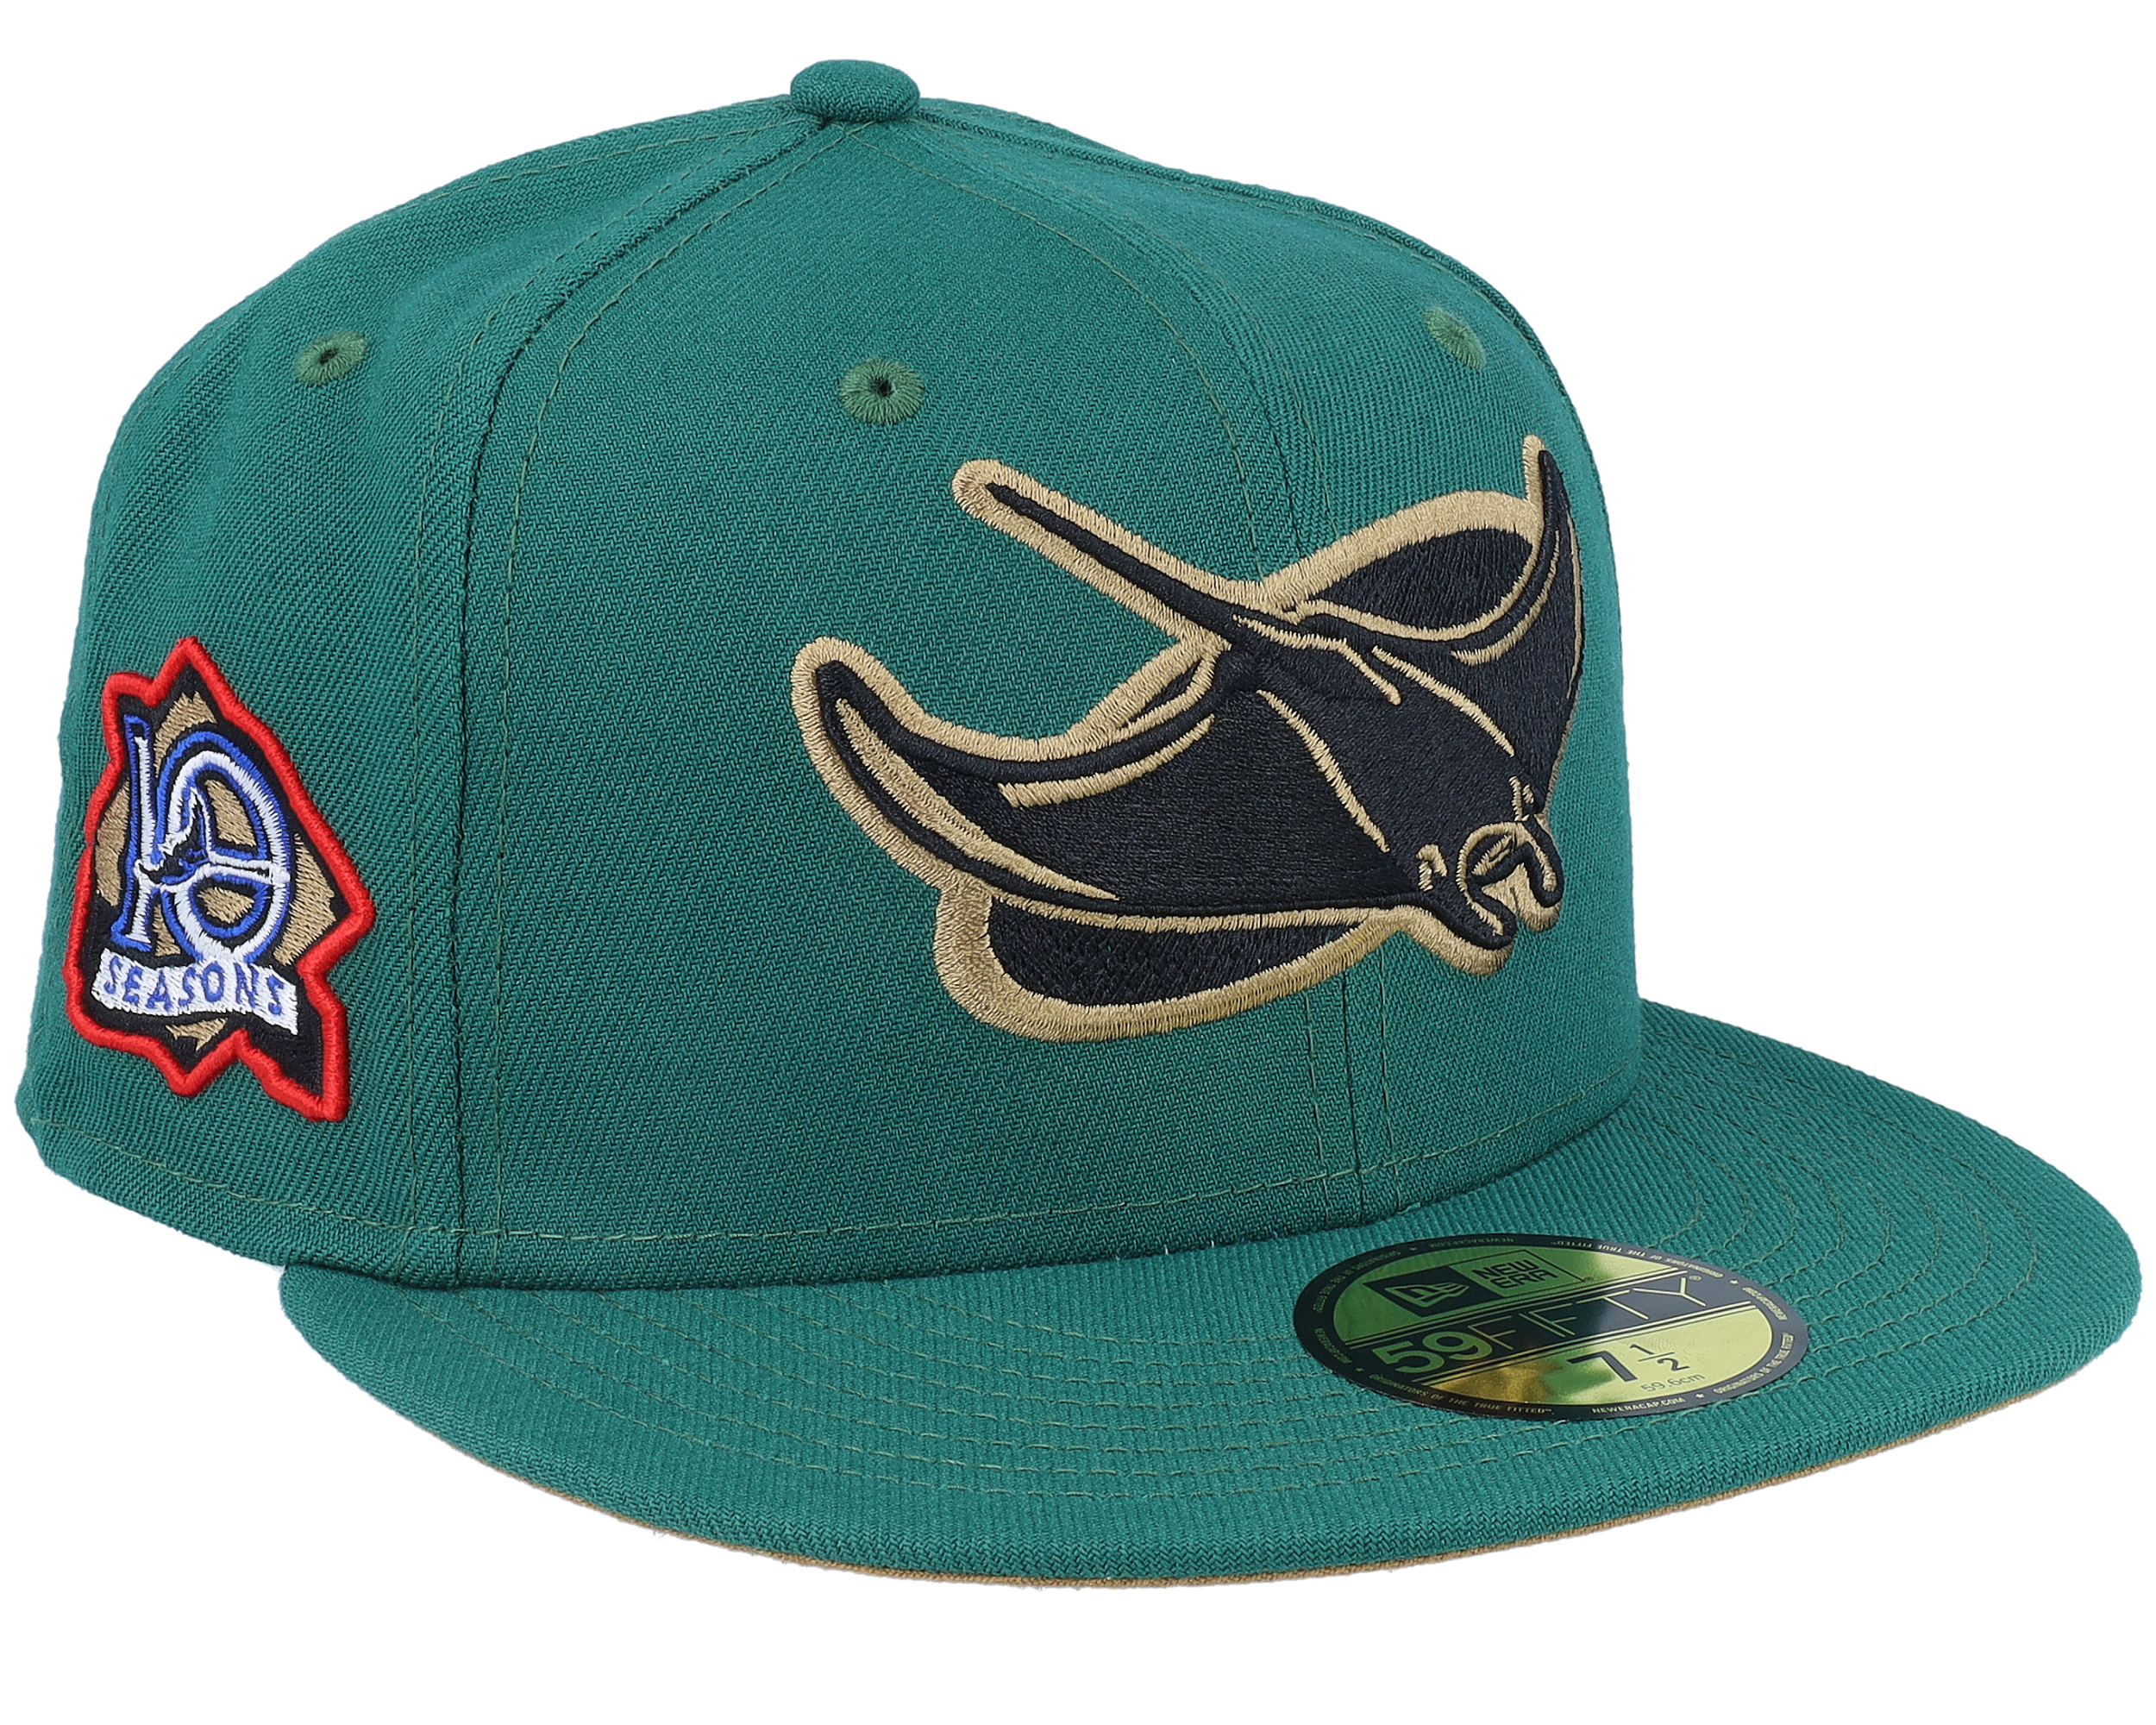 New Era - MiLB Green snapback Cap - Fresno Grizzlies MiLB Savanna 59FIFTY Olive/Orange Fitted @ Fitted World By Hatstore